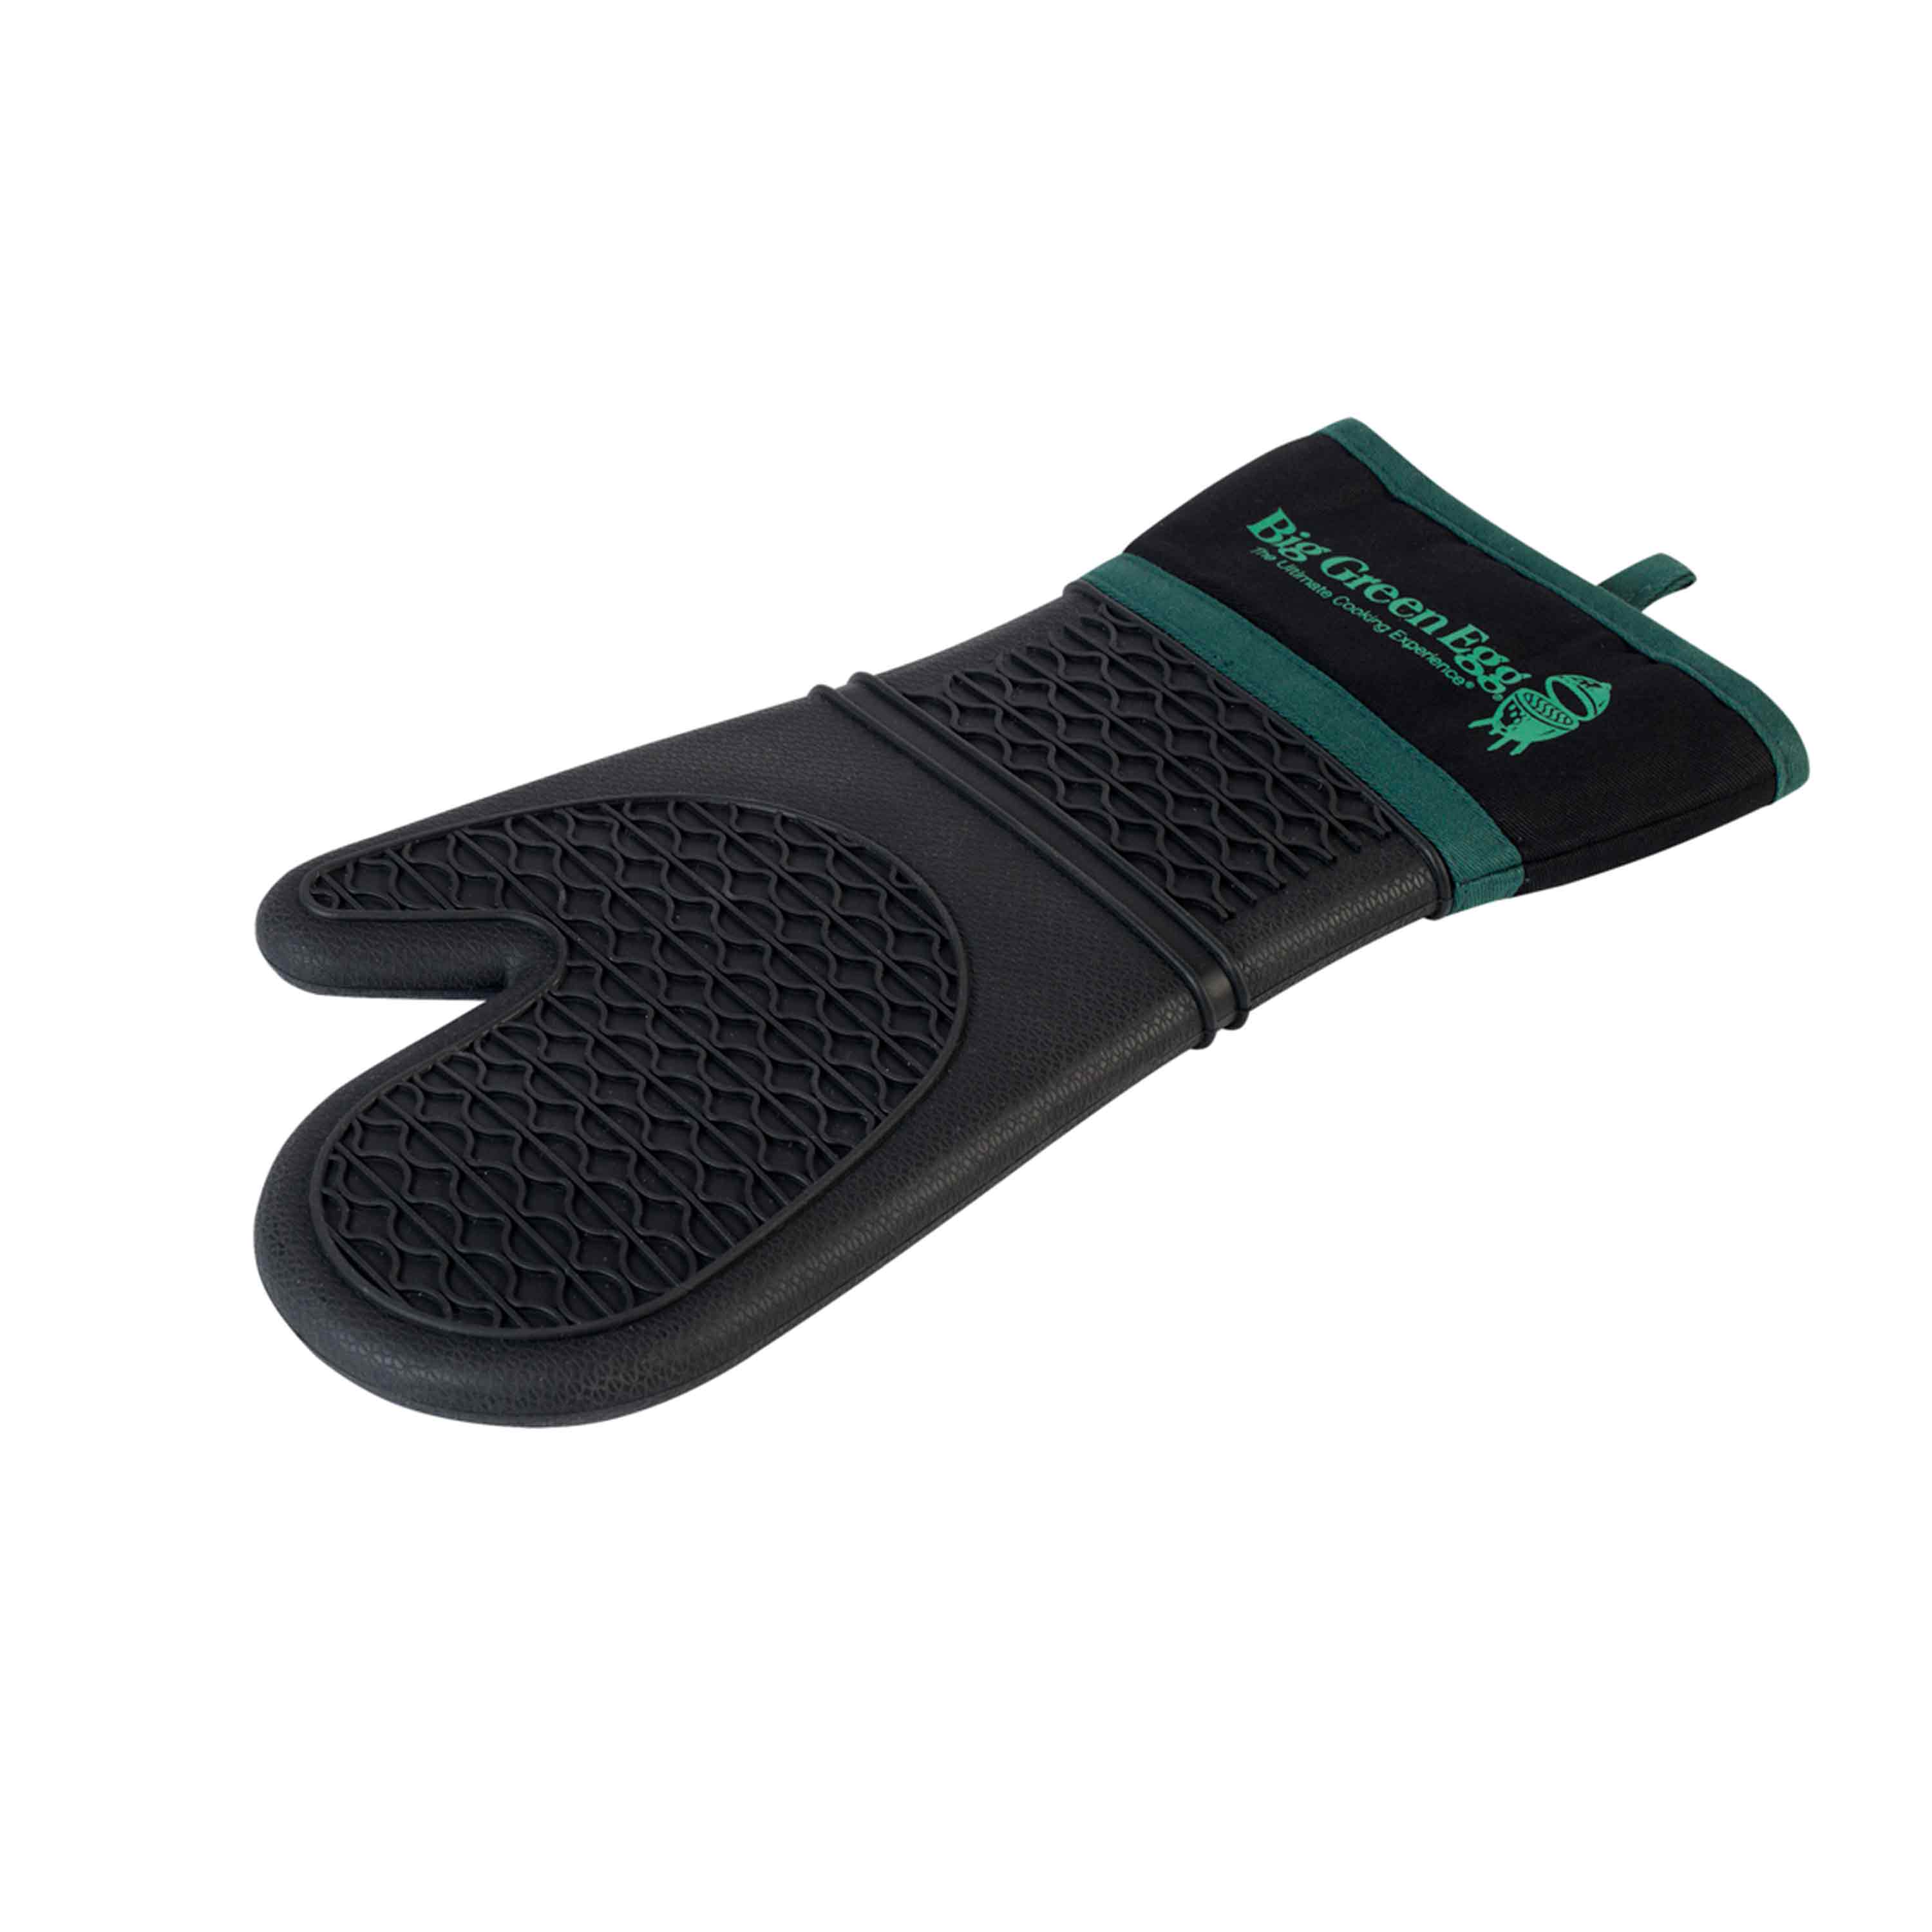 Big Green Egg Grillhandschuh Silicone Grilling Mitt 